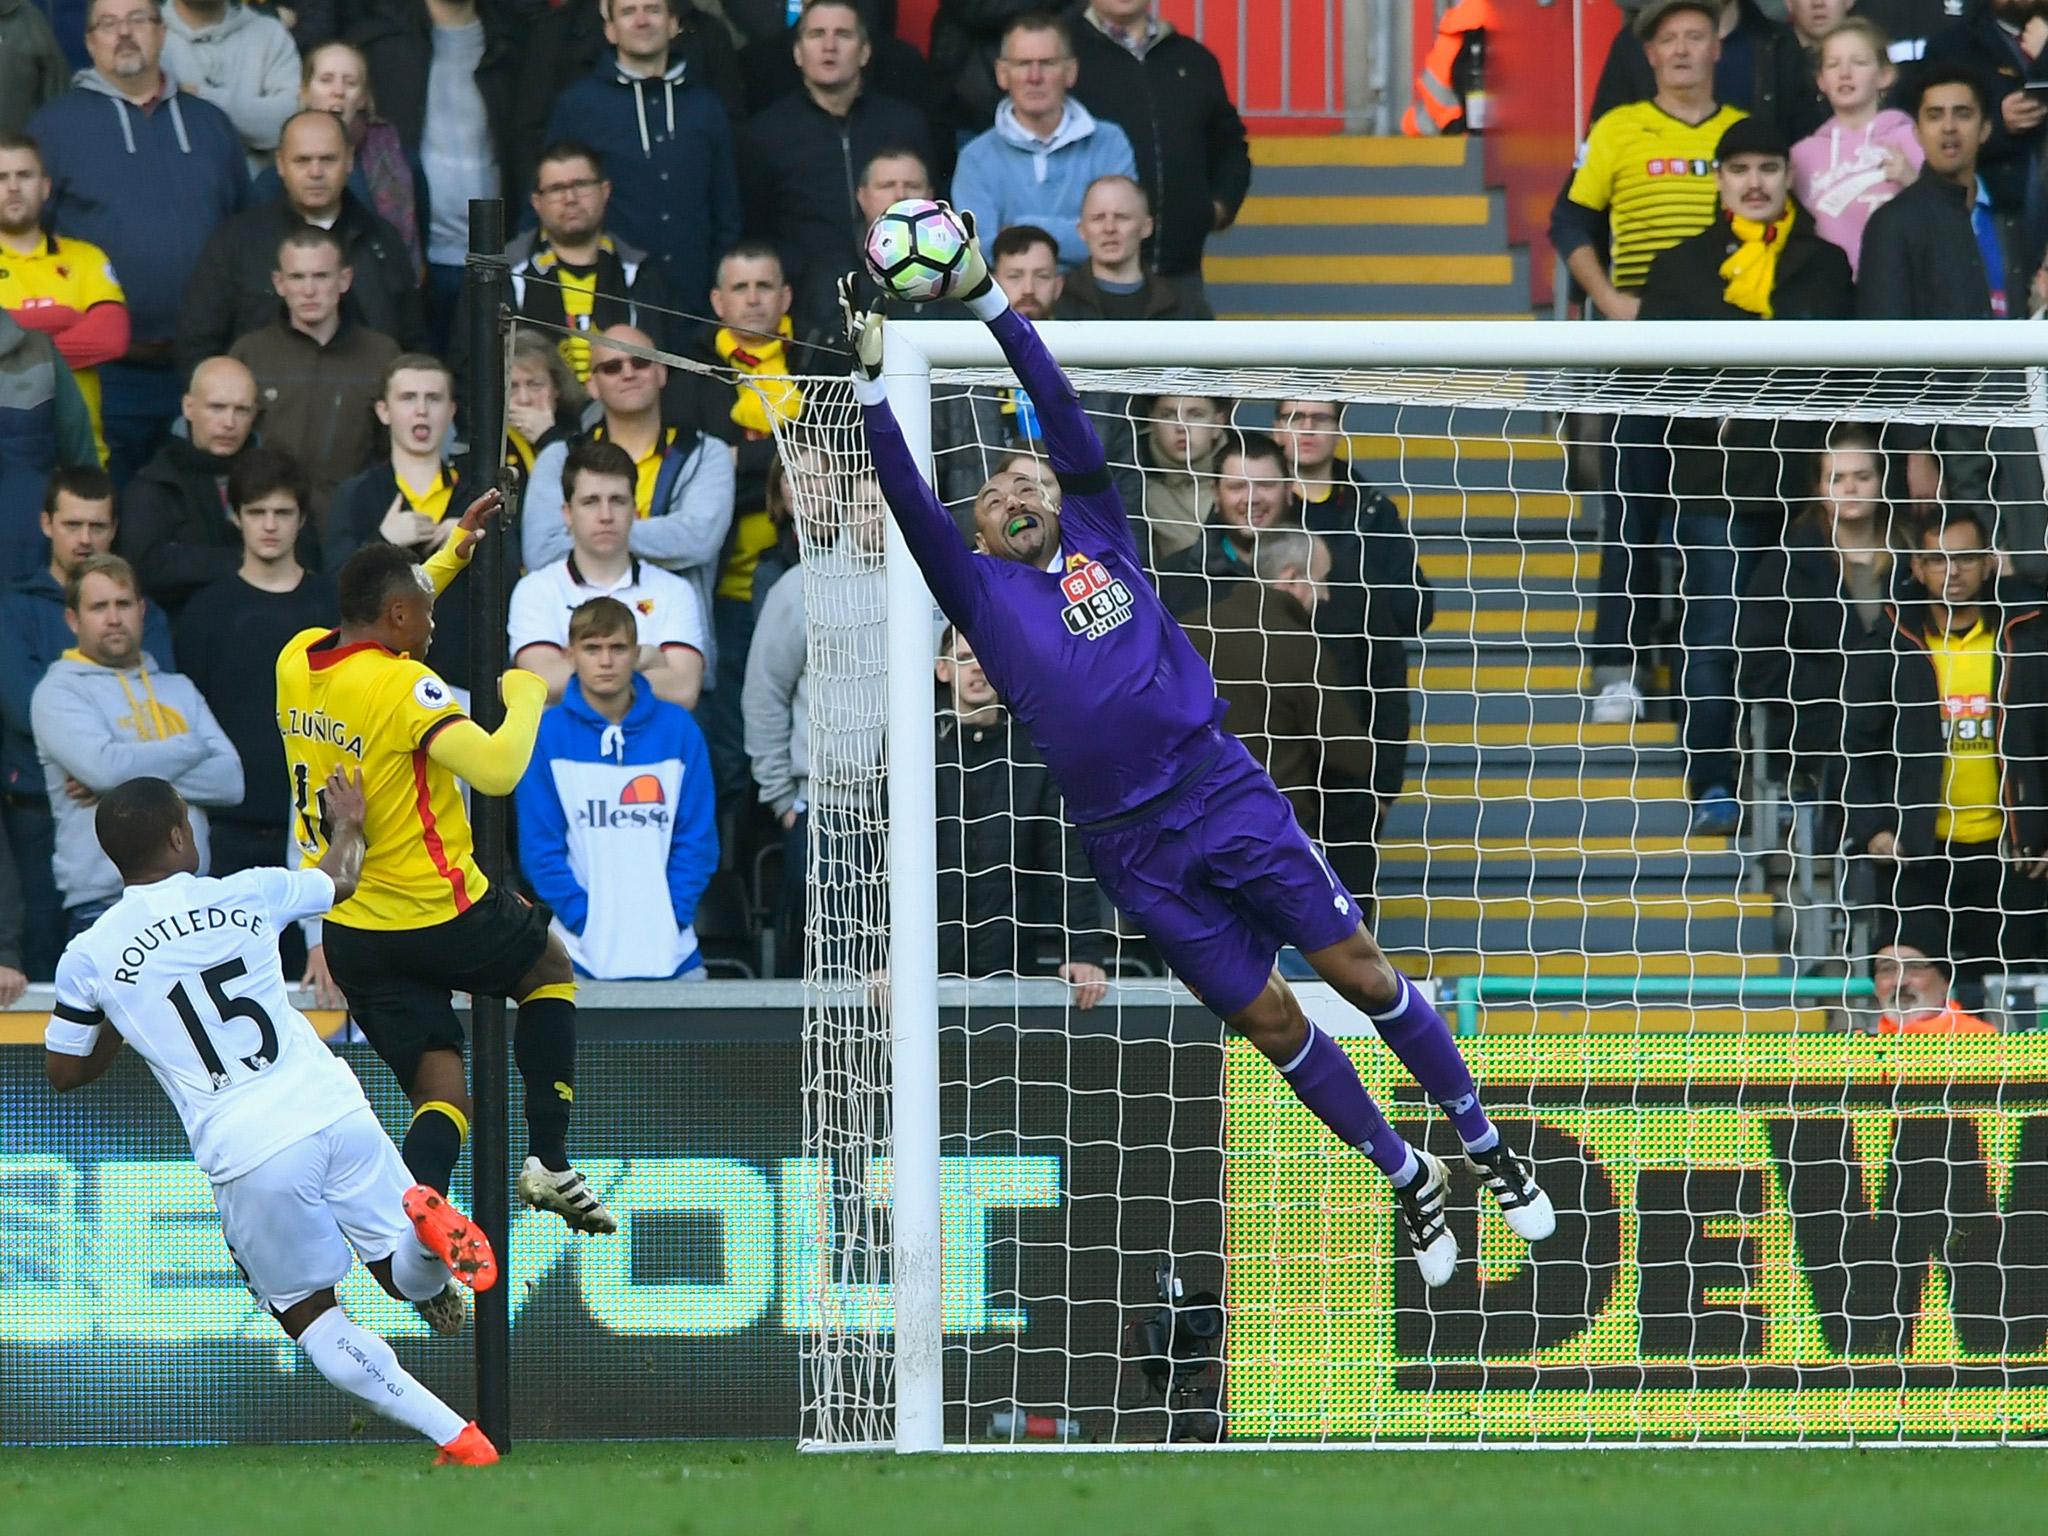 Watford goalkeeper Heurelho Gomes saves an effort from Wayne Routledge during the recent draw with Swansea